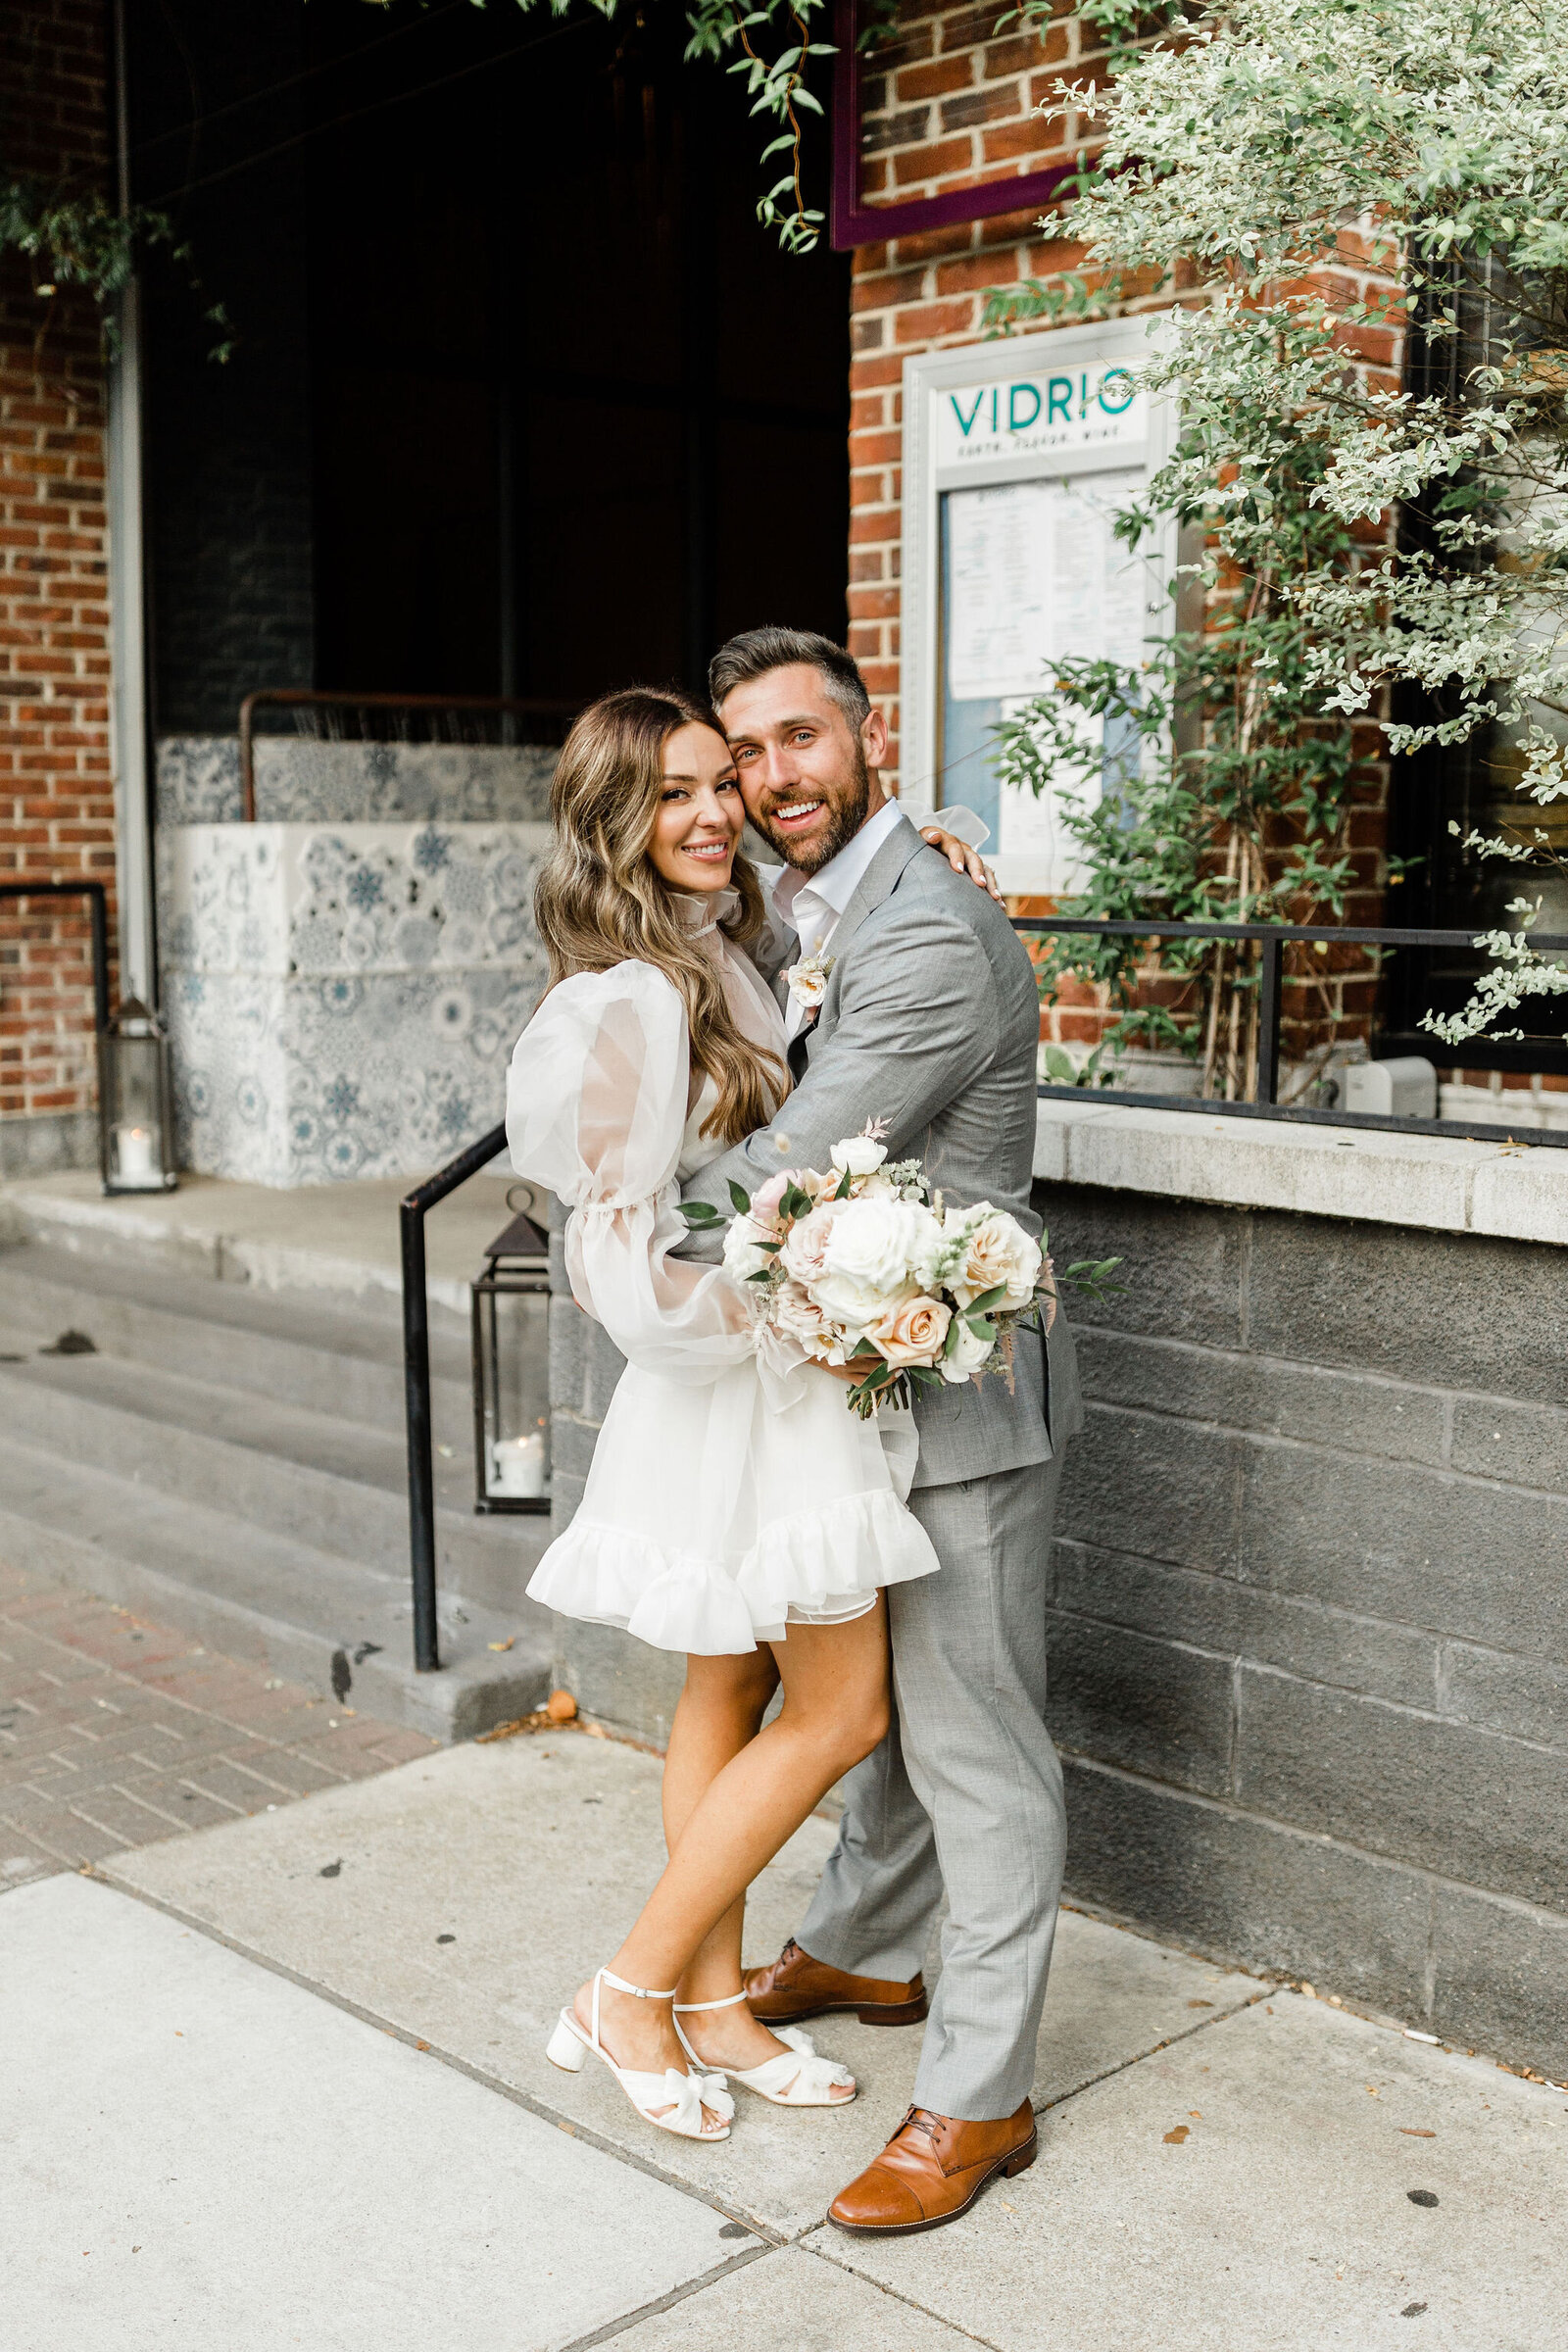 Wedding Day Couples Photos in Reception Dress | Raleigh NC | The Axtells Photo and Film